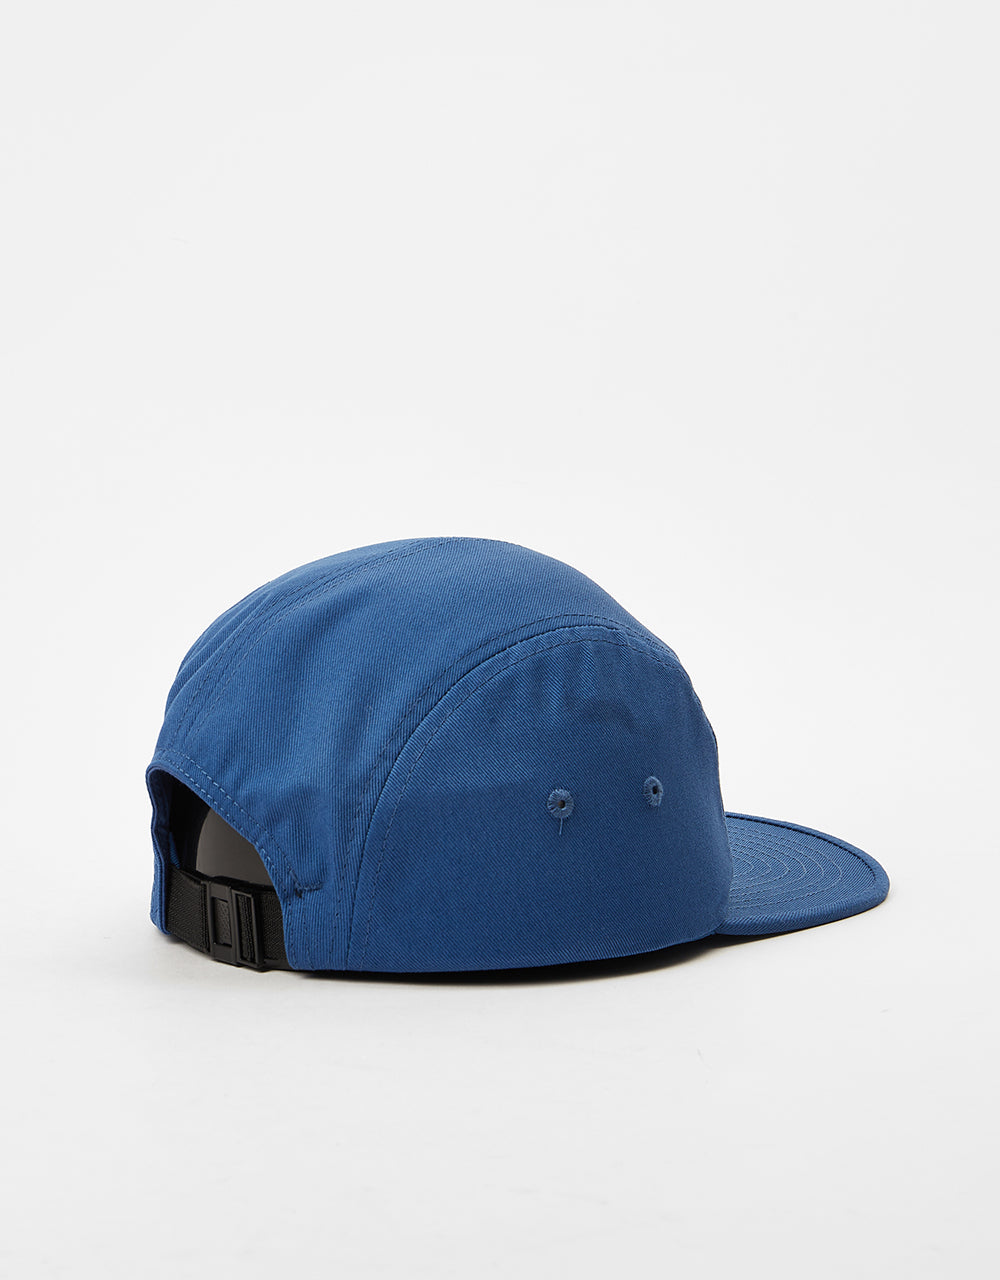 Route One 5 Panel Cap - Air Force Blue